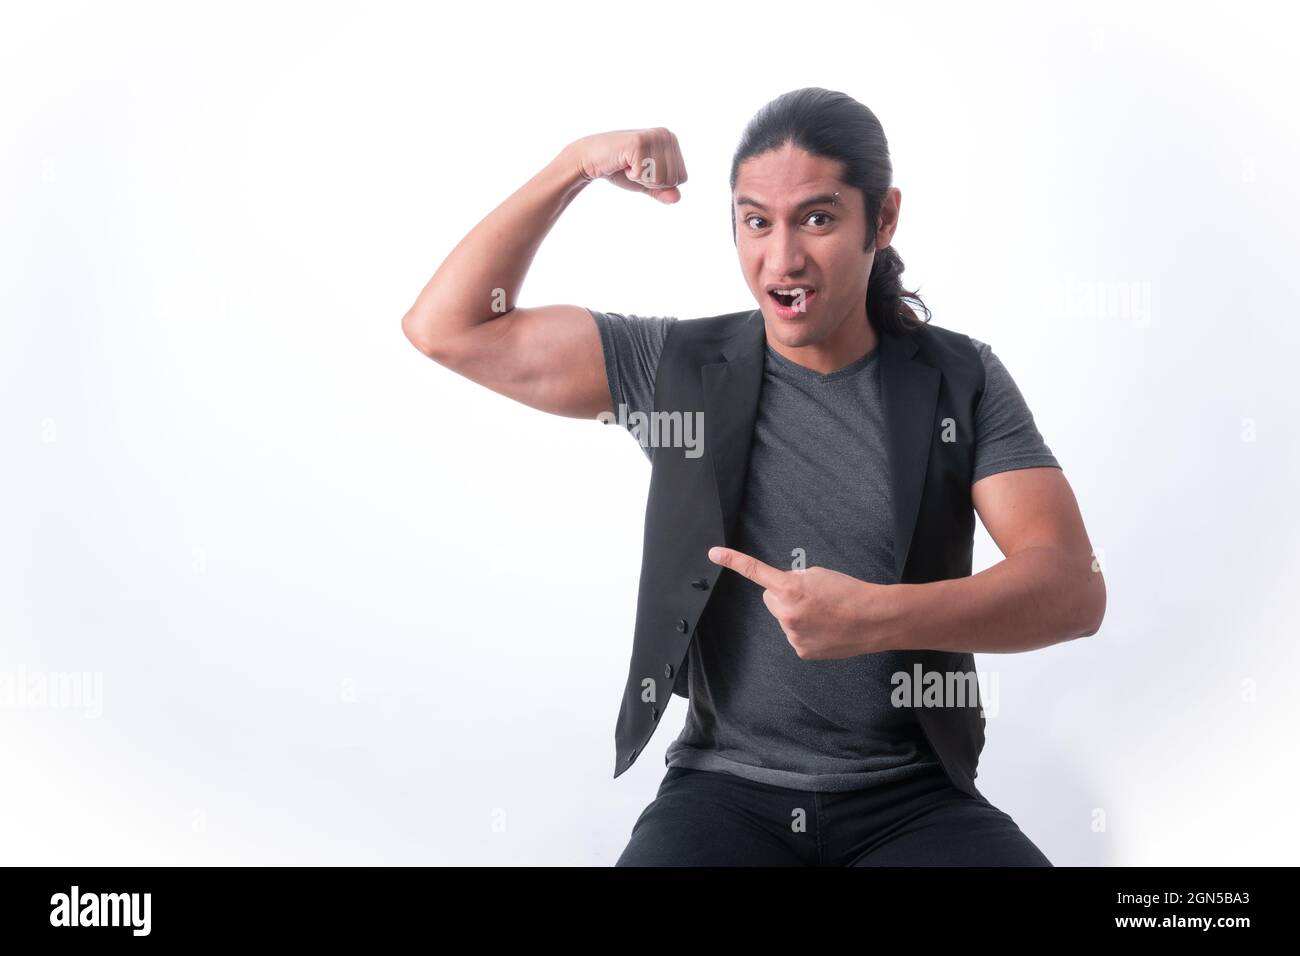 Person with white background. He shows in muscle he has in his arm and with the other hand he points out how strong he is. White space. Man gesticulat Stock Photo